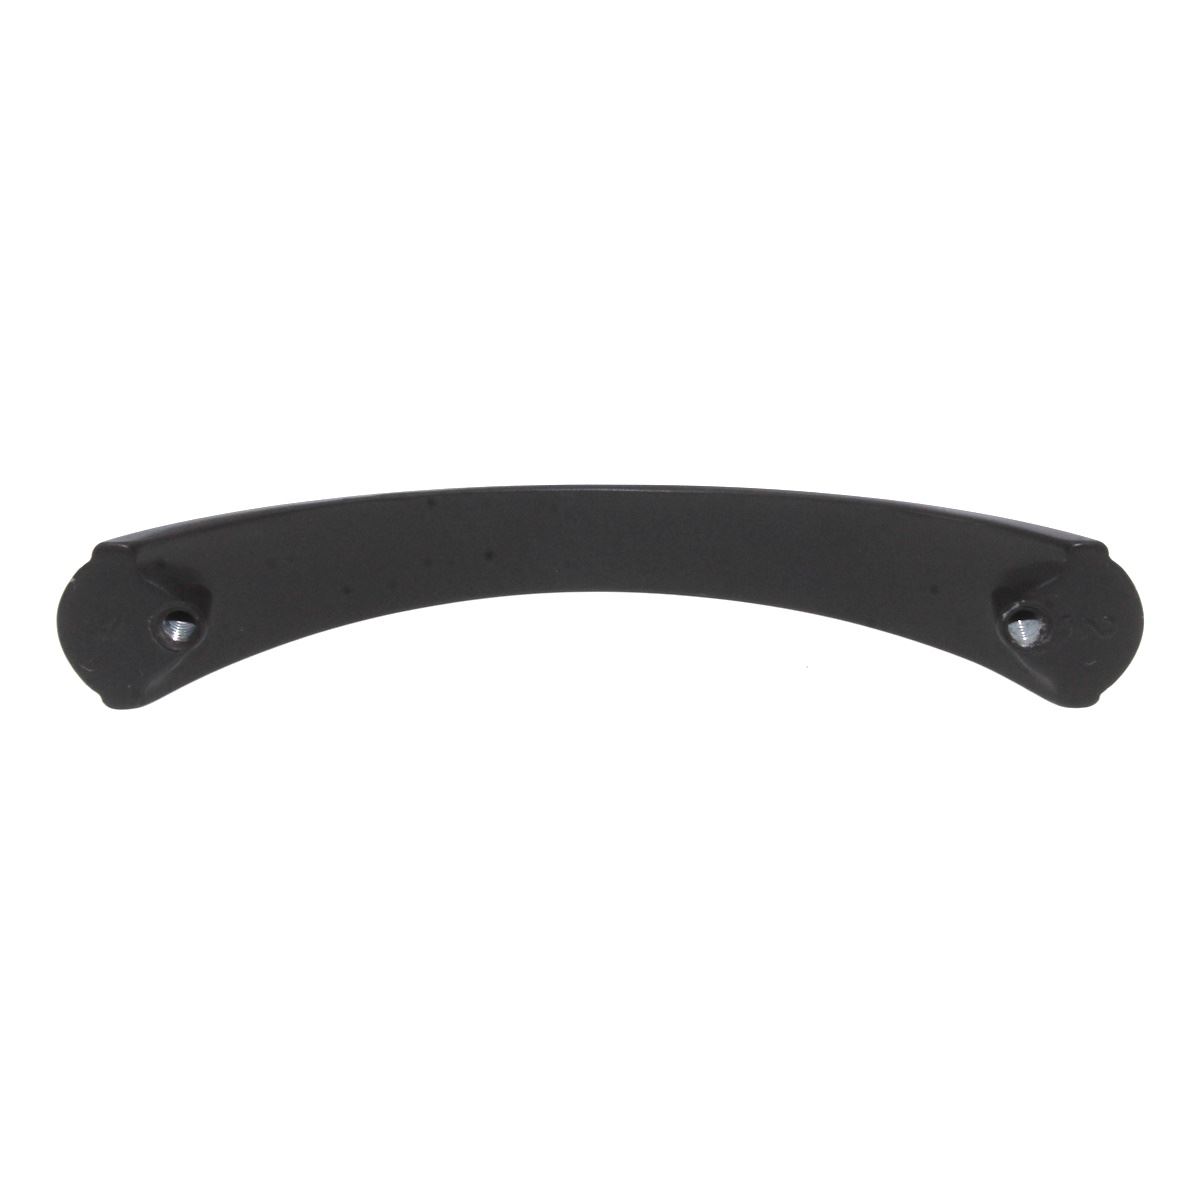 Century Kentwood Oil-Rubbed Bronze 3 3/4" (96mm) Ctr Cabinet Arch Pull 22936-OB